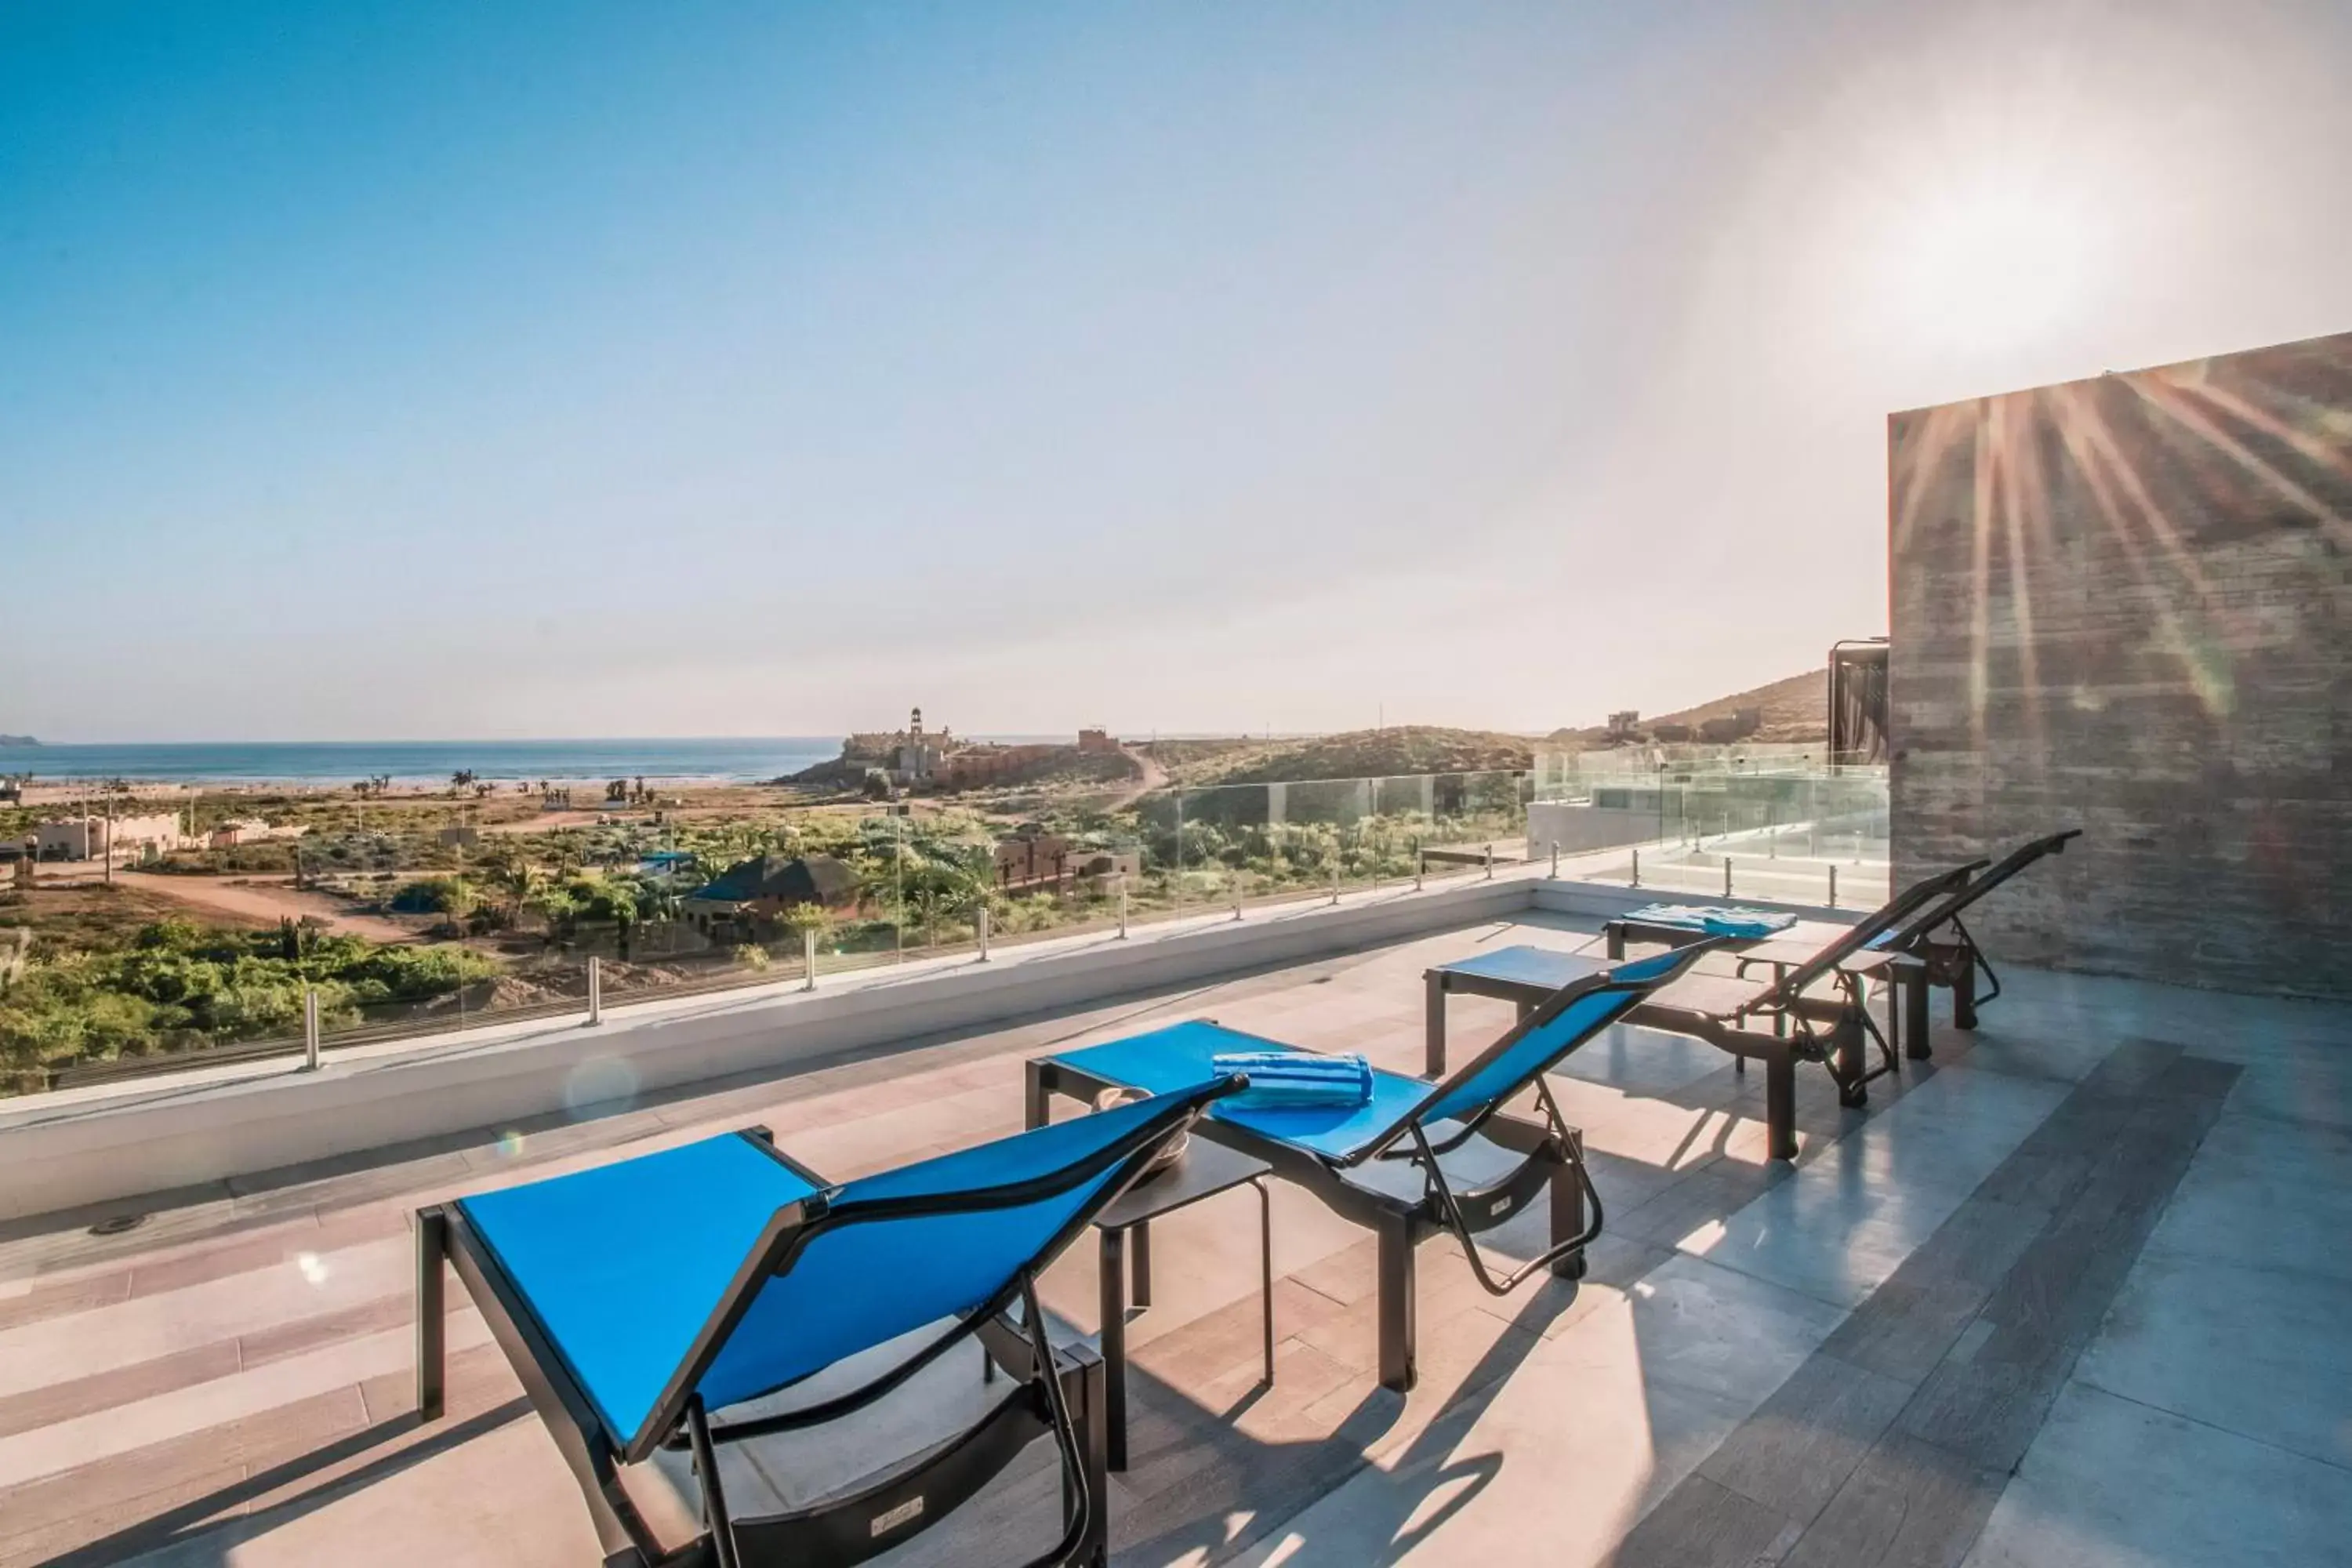 Balcony/Terrace, Swimming Pool in Cerritos Surf Residences